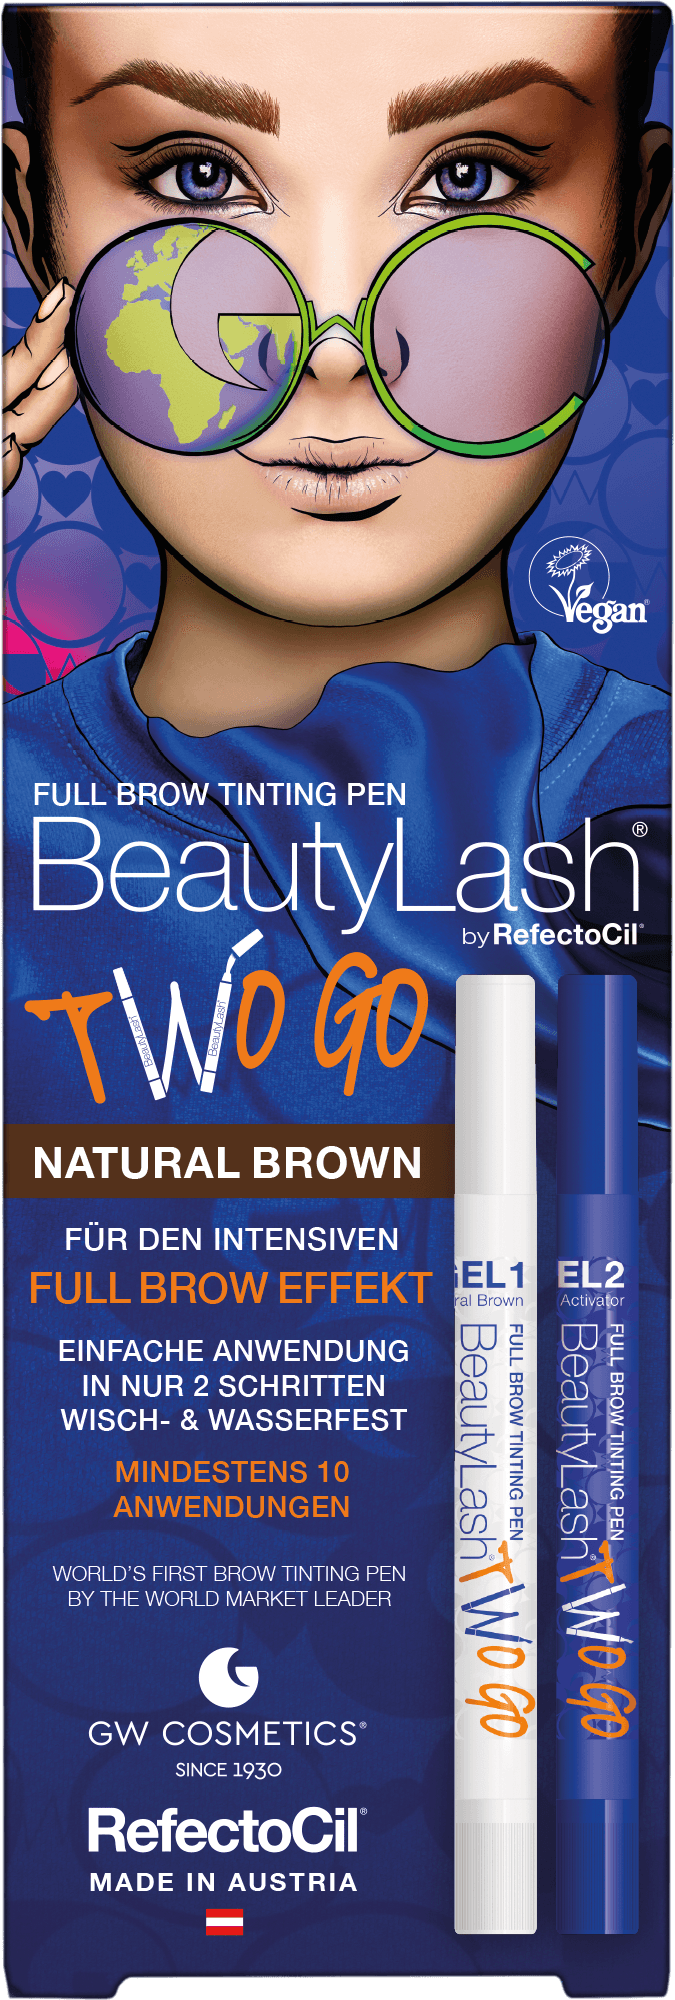  - Full Brow Tinting Pen Two Go - Natural Brown